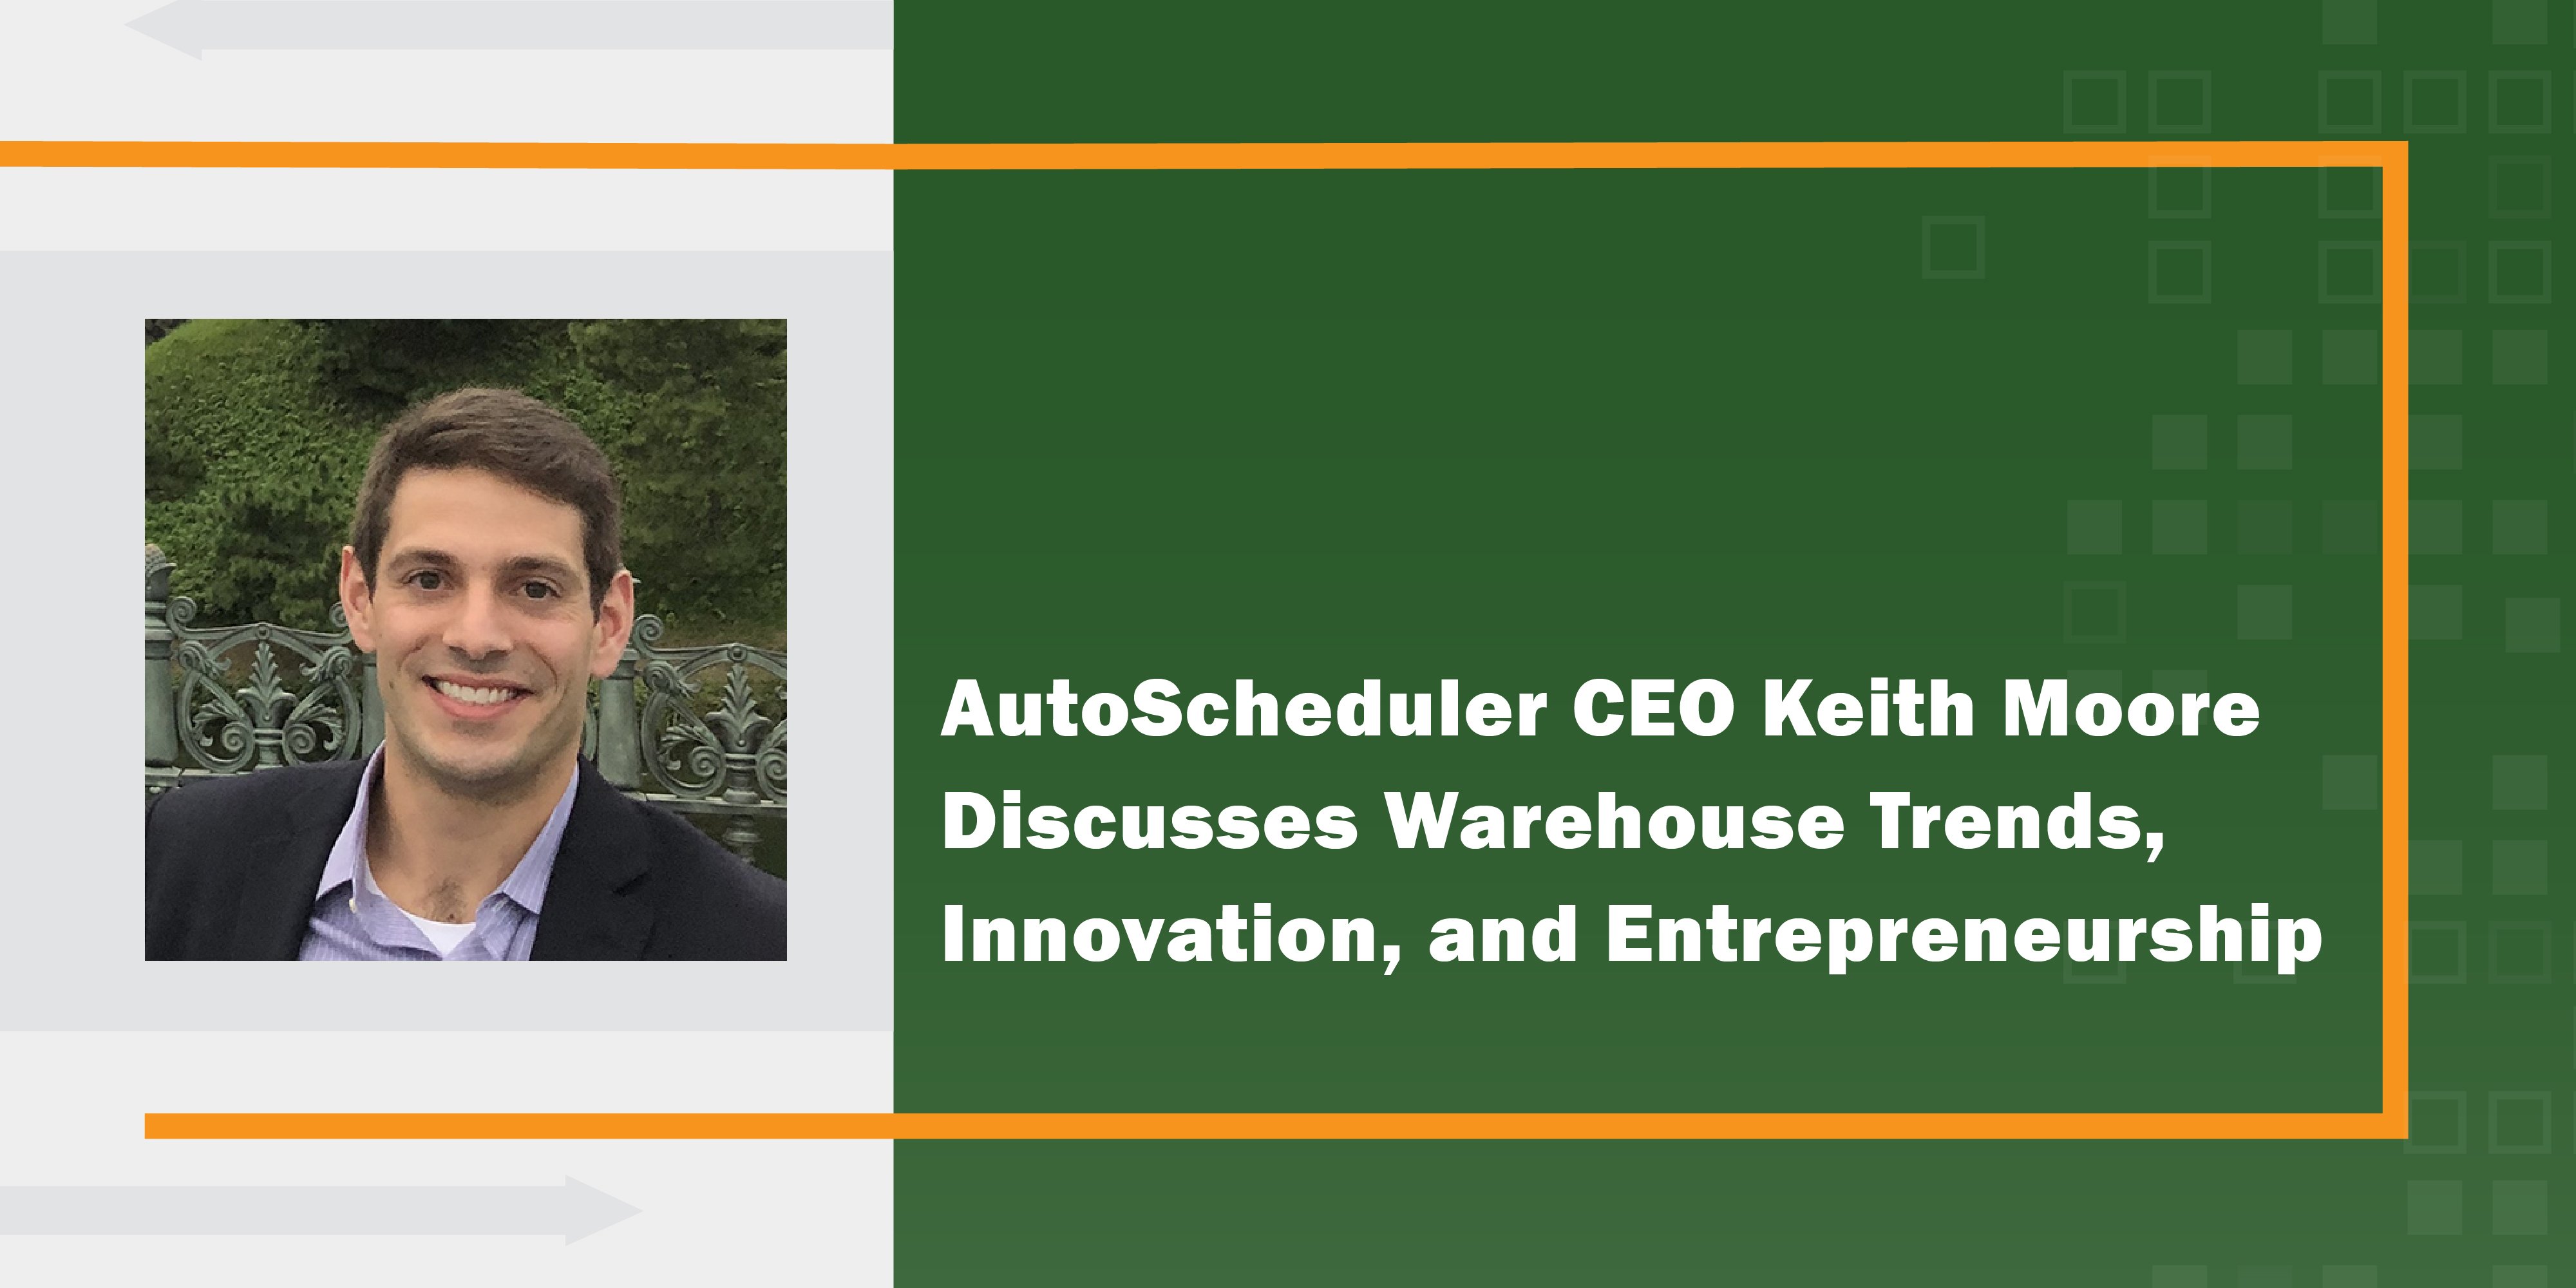 AutoScheduler CEO Keith Moore Discusses Warehouse Trends, Innovation, and Entrepreneurship